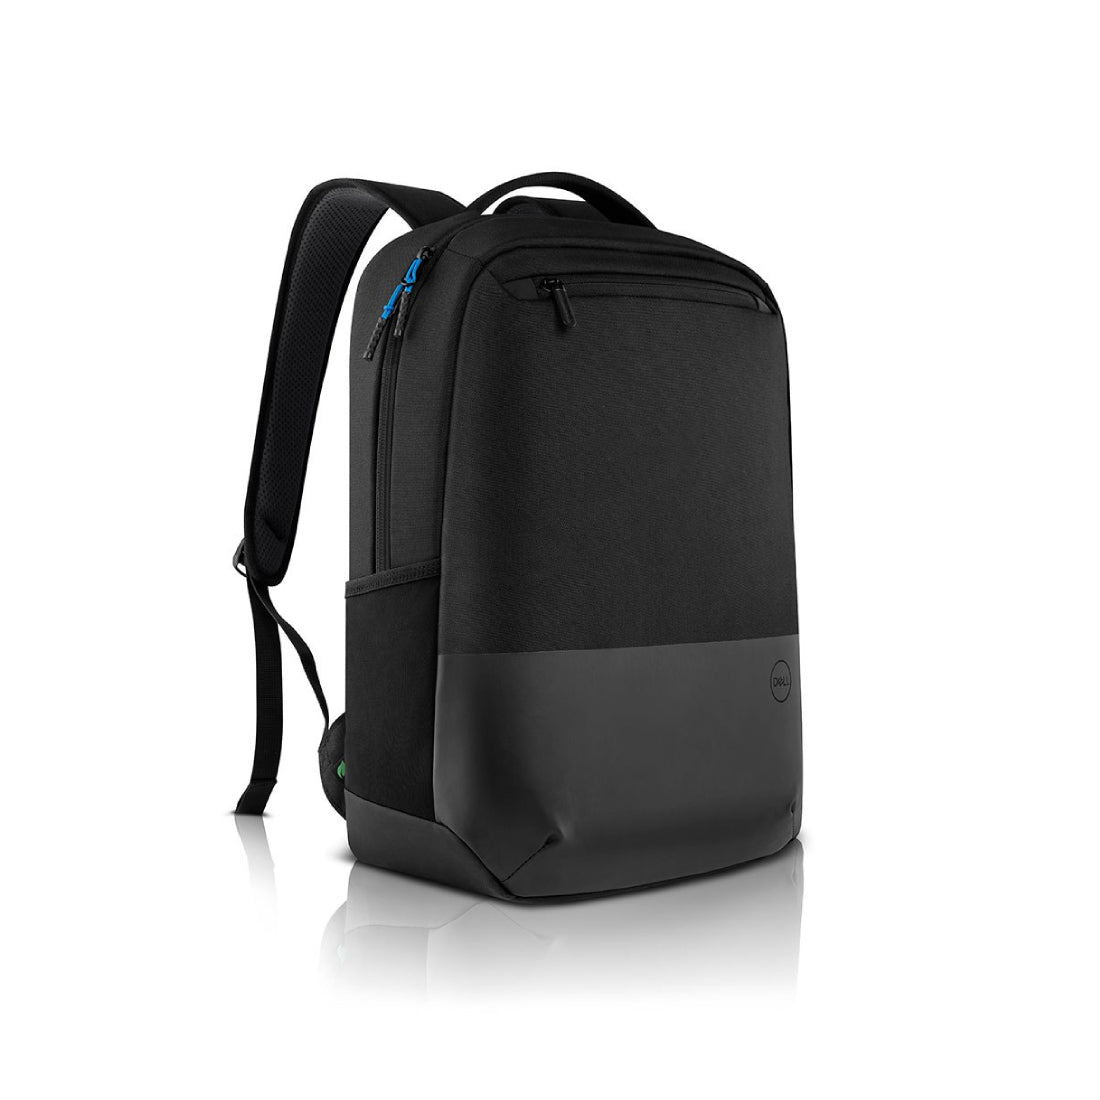 Dell PO1520PS Backpack & MS116 Wired Optical Mouse - Black - حقيبة حاسوب محمول و فأرة - Store 974 | ستور ٩٧٤